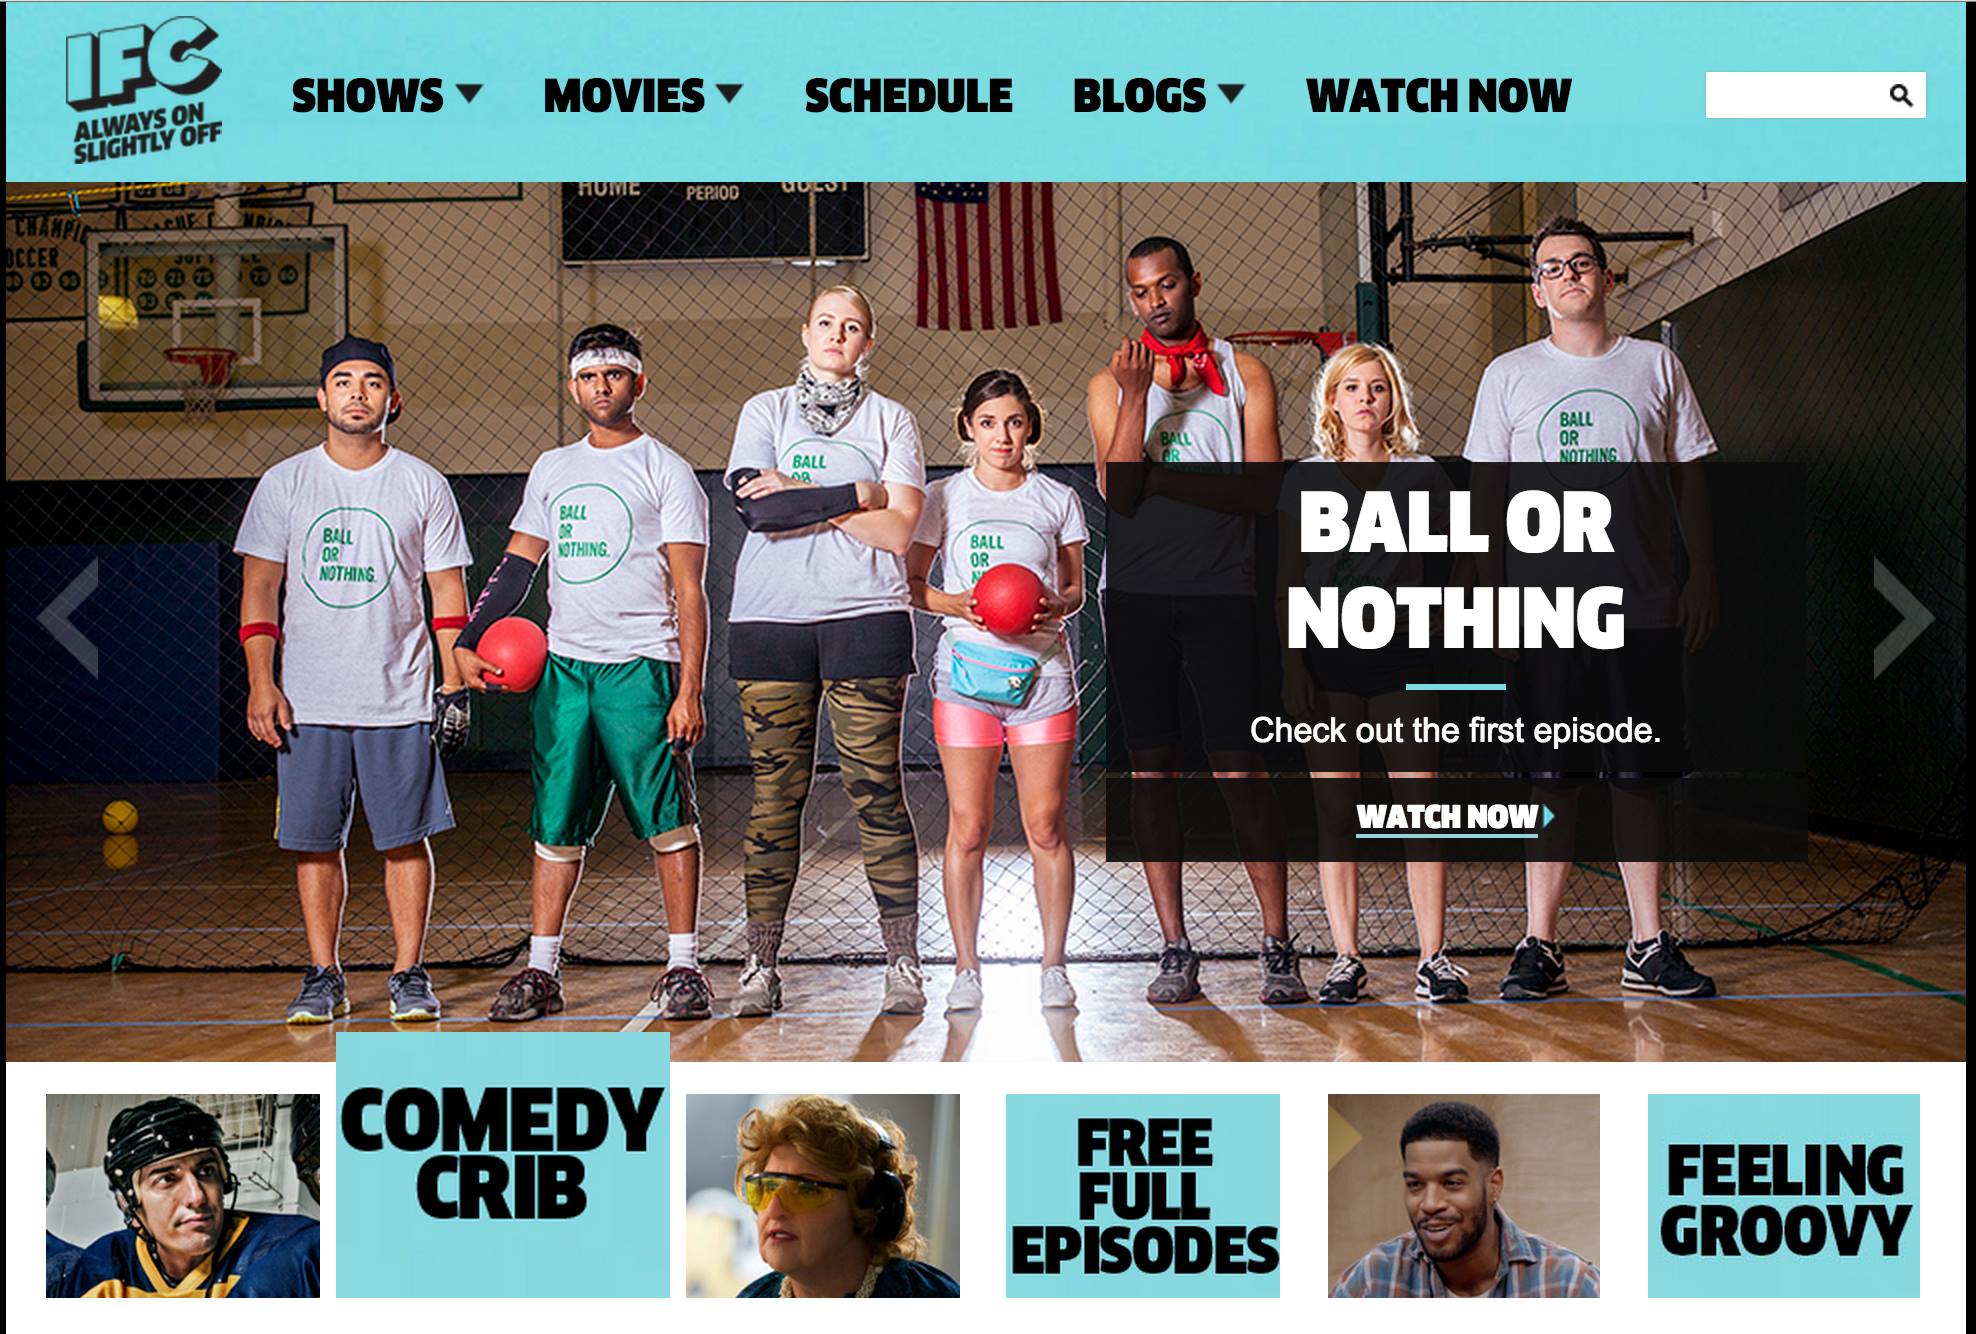 'Ball or Nothing' on IFC.